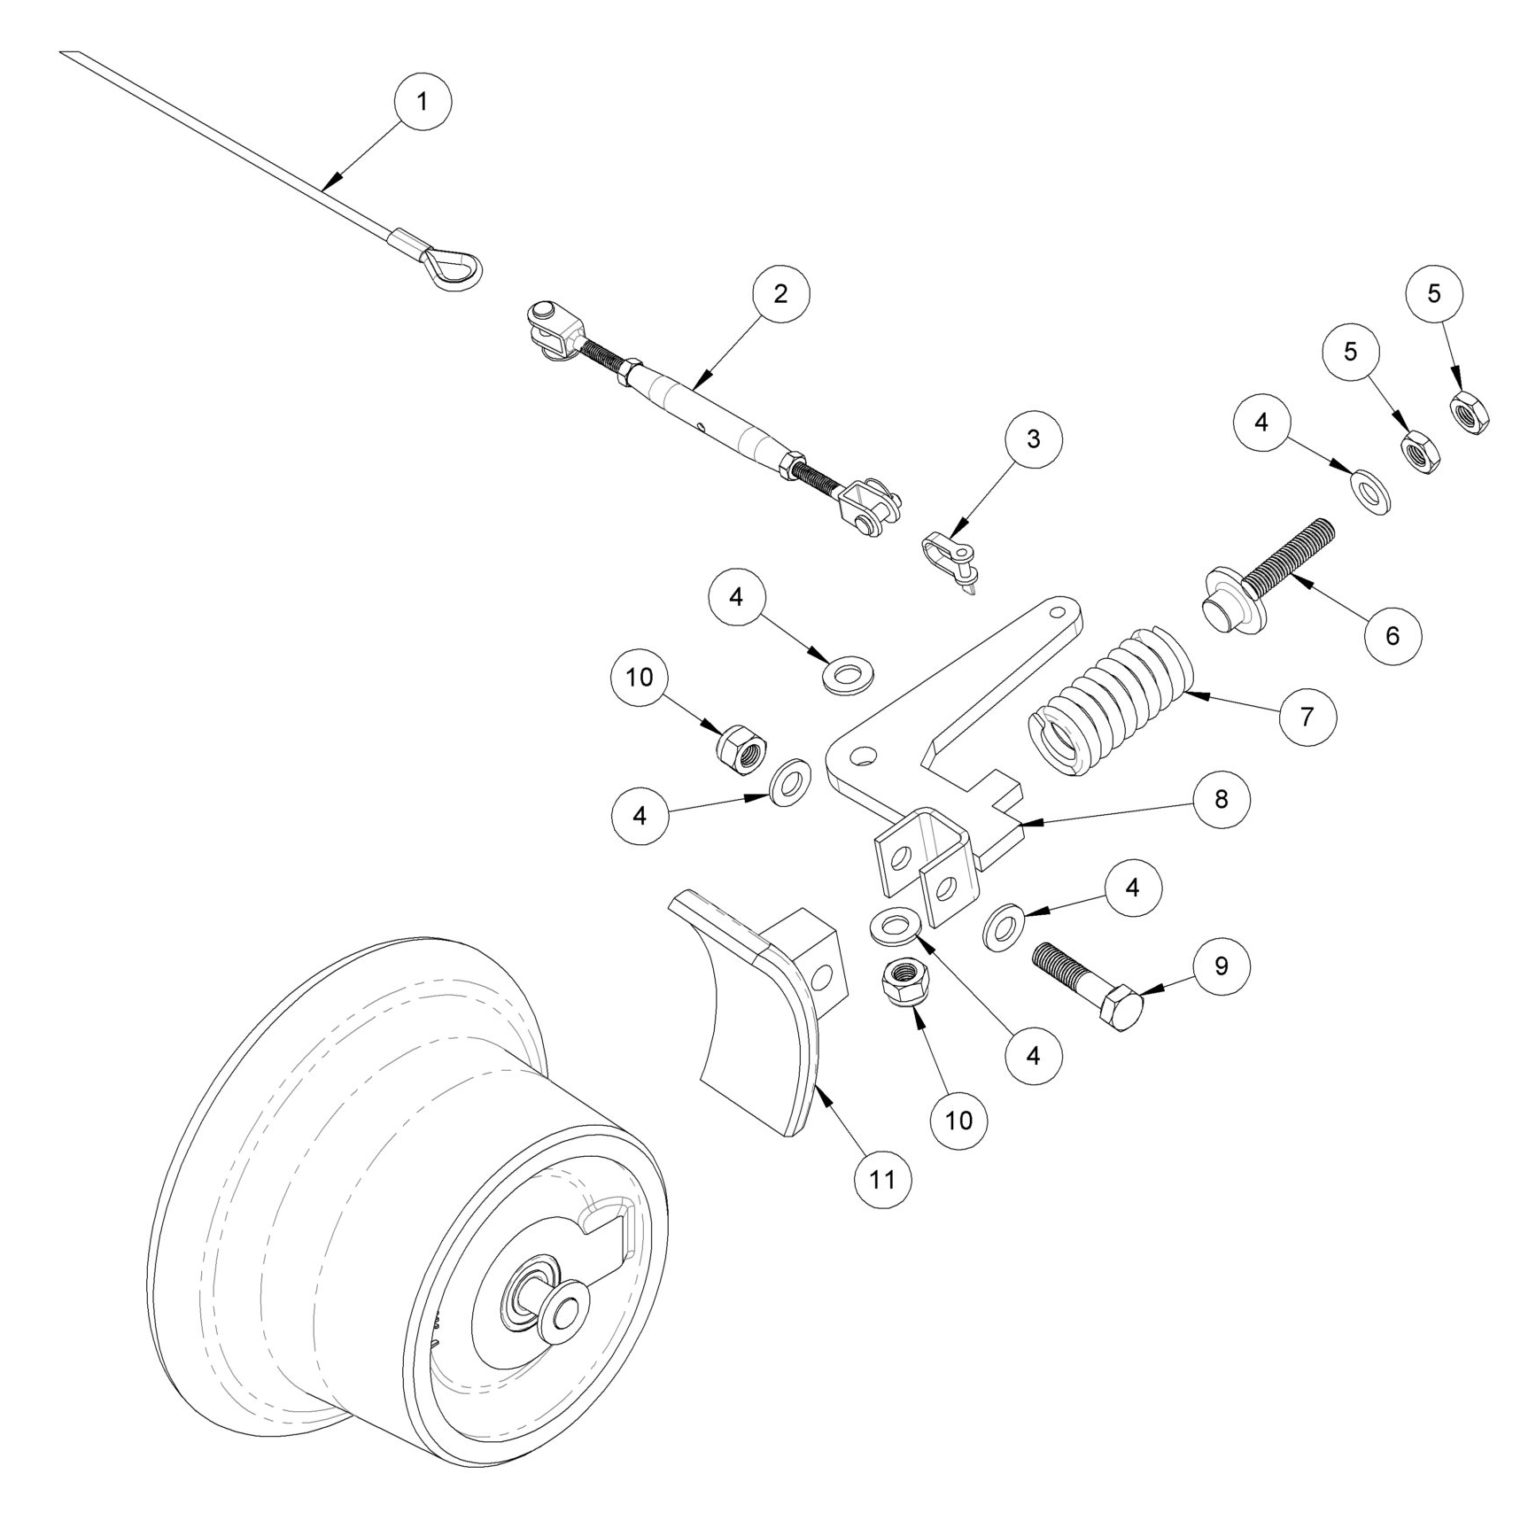 Permaquip Link Trolley - Braked Wheel Assembly